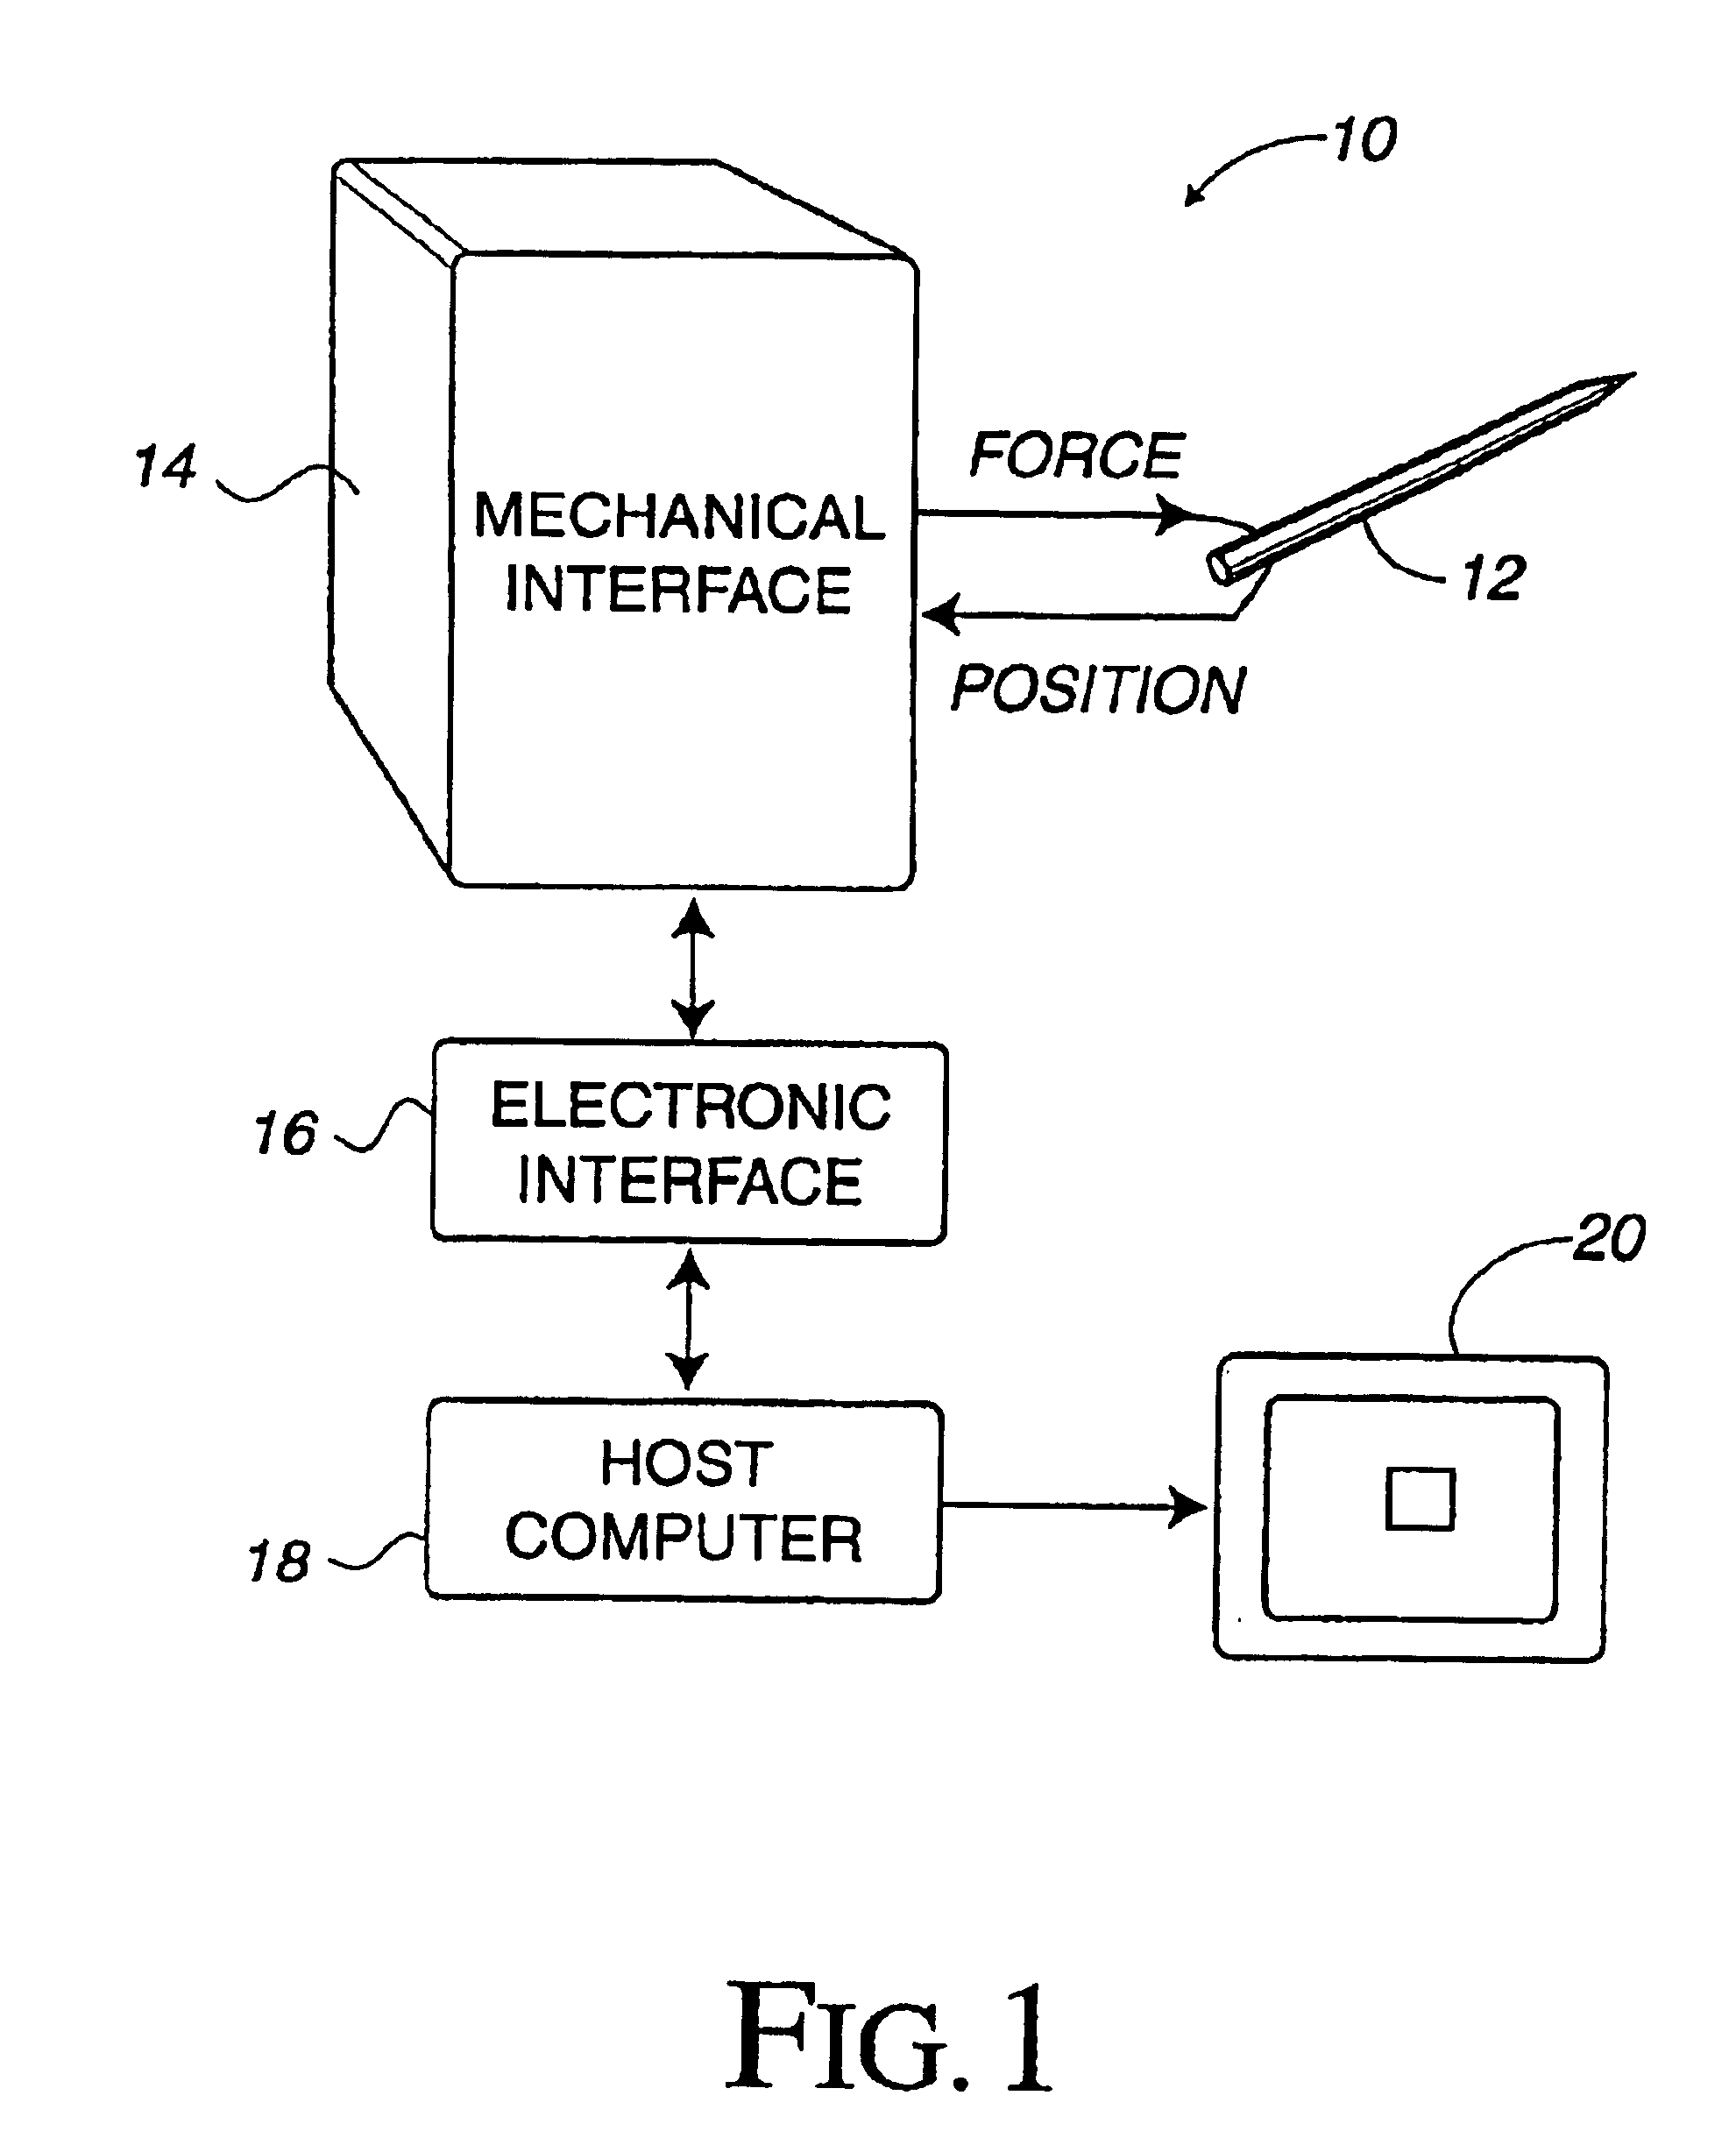 Method and apparatus for providing force feedback using multiple grounded actuators